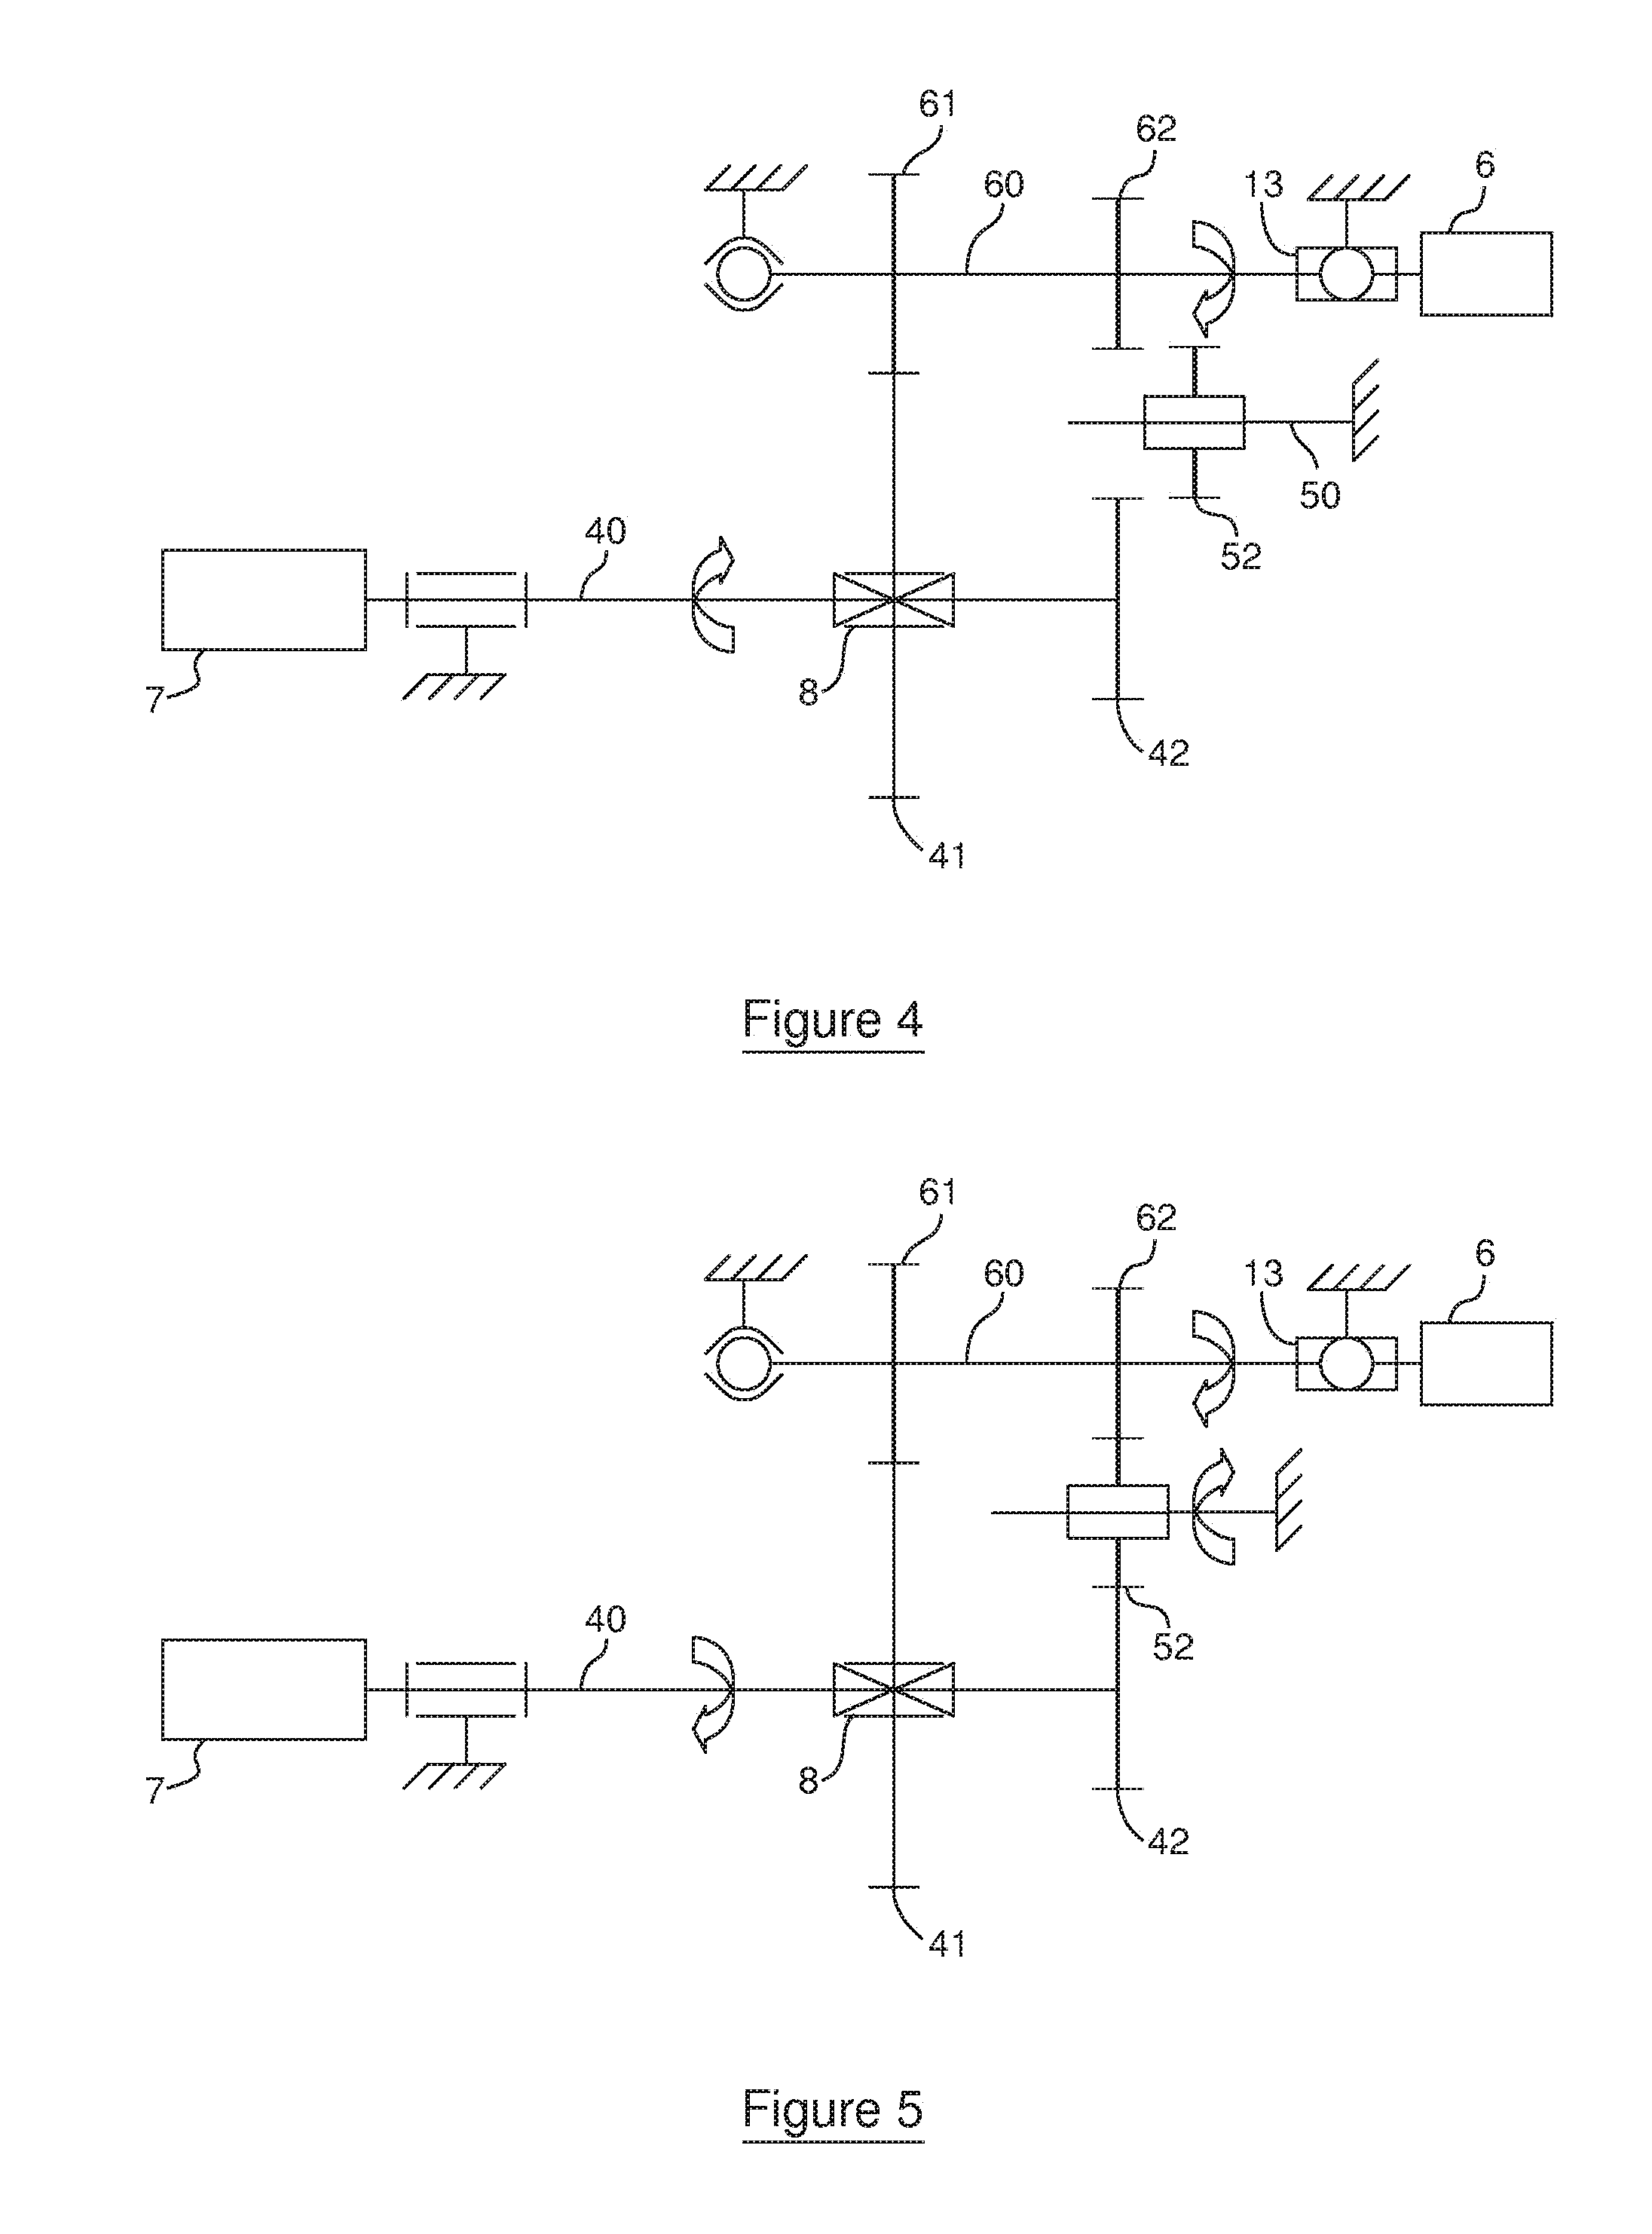 Hydraulic device for emergency starting a turbine engine, propulsion system of a multi-engine helicopter provided with one such device, and corresponding helicopter